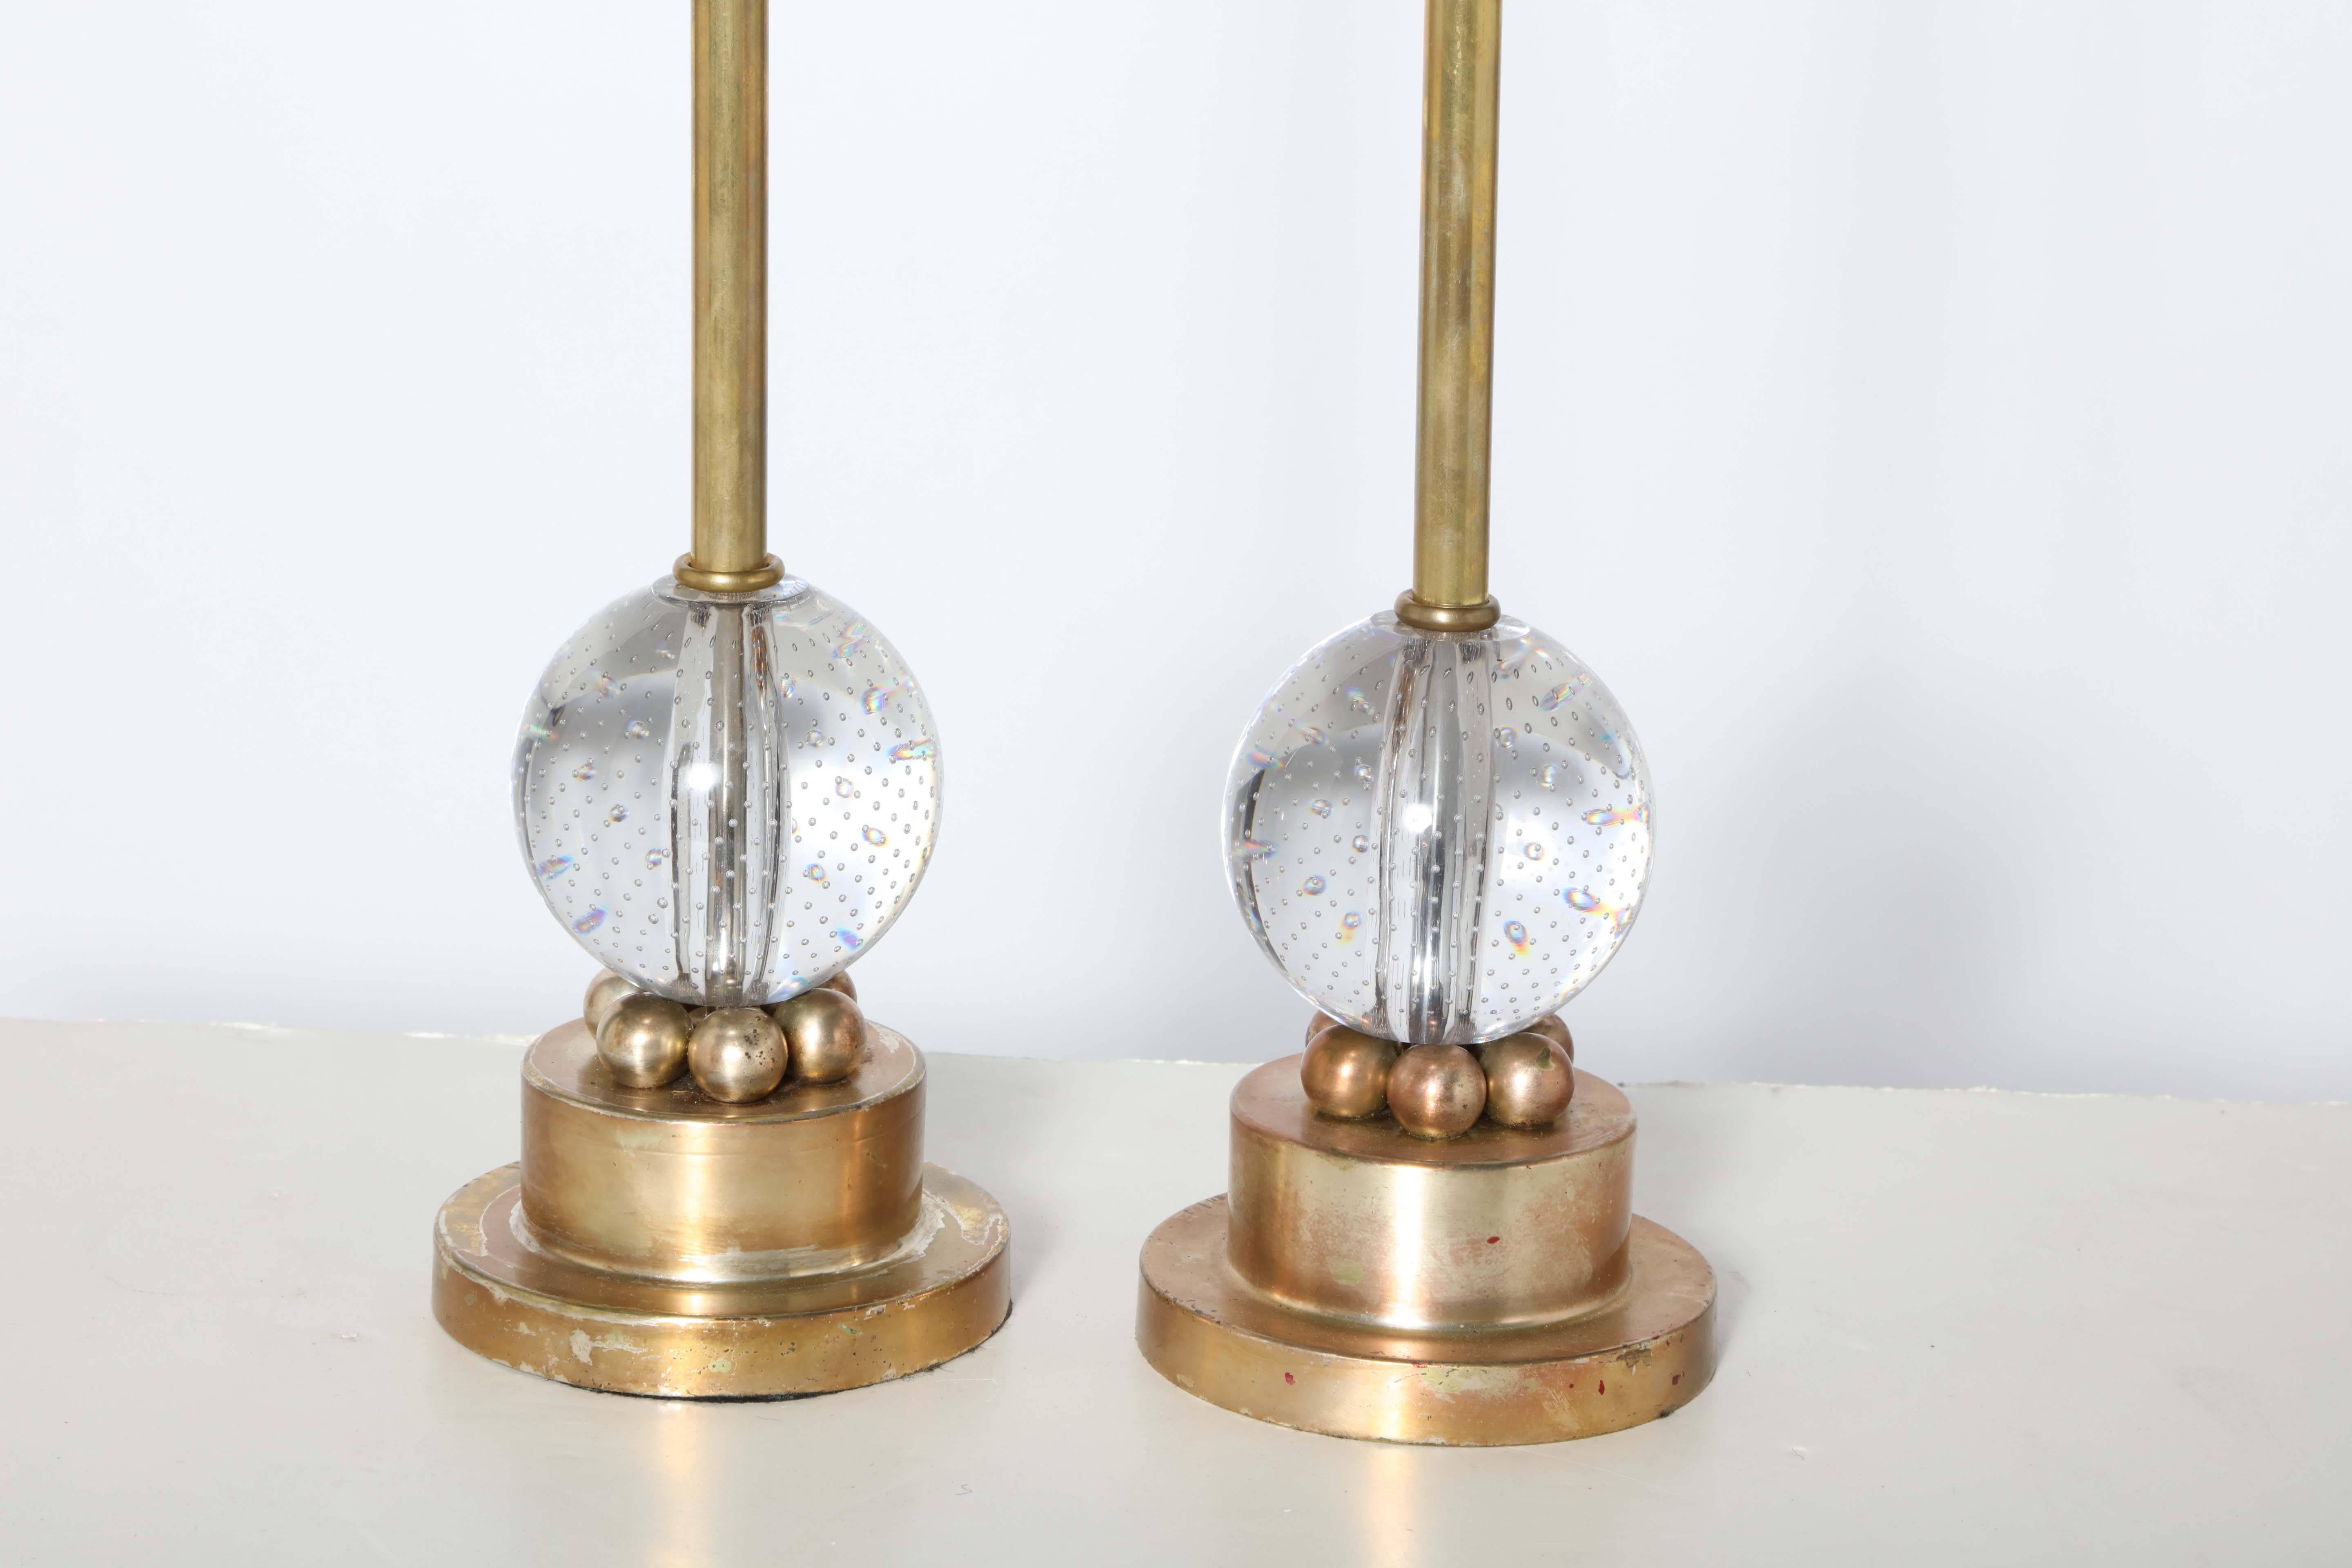 Pair of Murano Glass Globe and Brass Hollywood Regency Thin Candlestick Table Lamps.  Featuring a slender cylindrical Brass center column, round 4D clear controlled bubble Glass spheres, six smaller, lower (3/4D) Brass sphere surround details on a